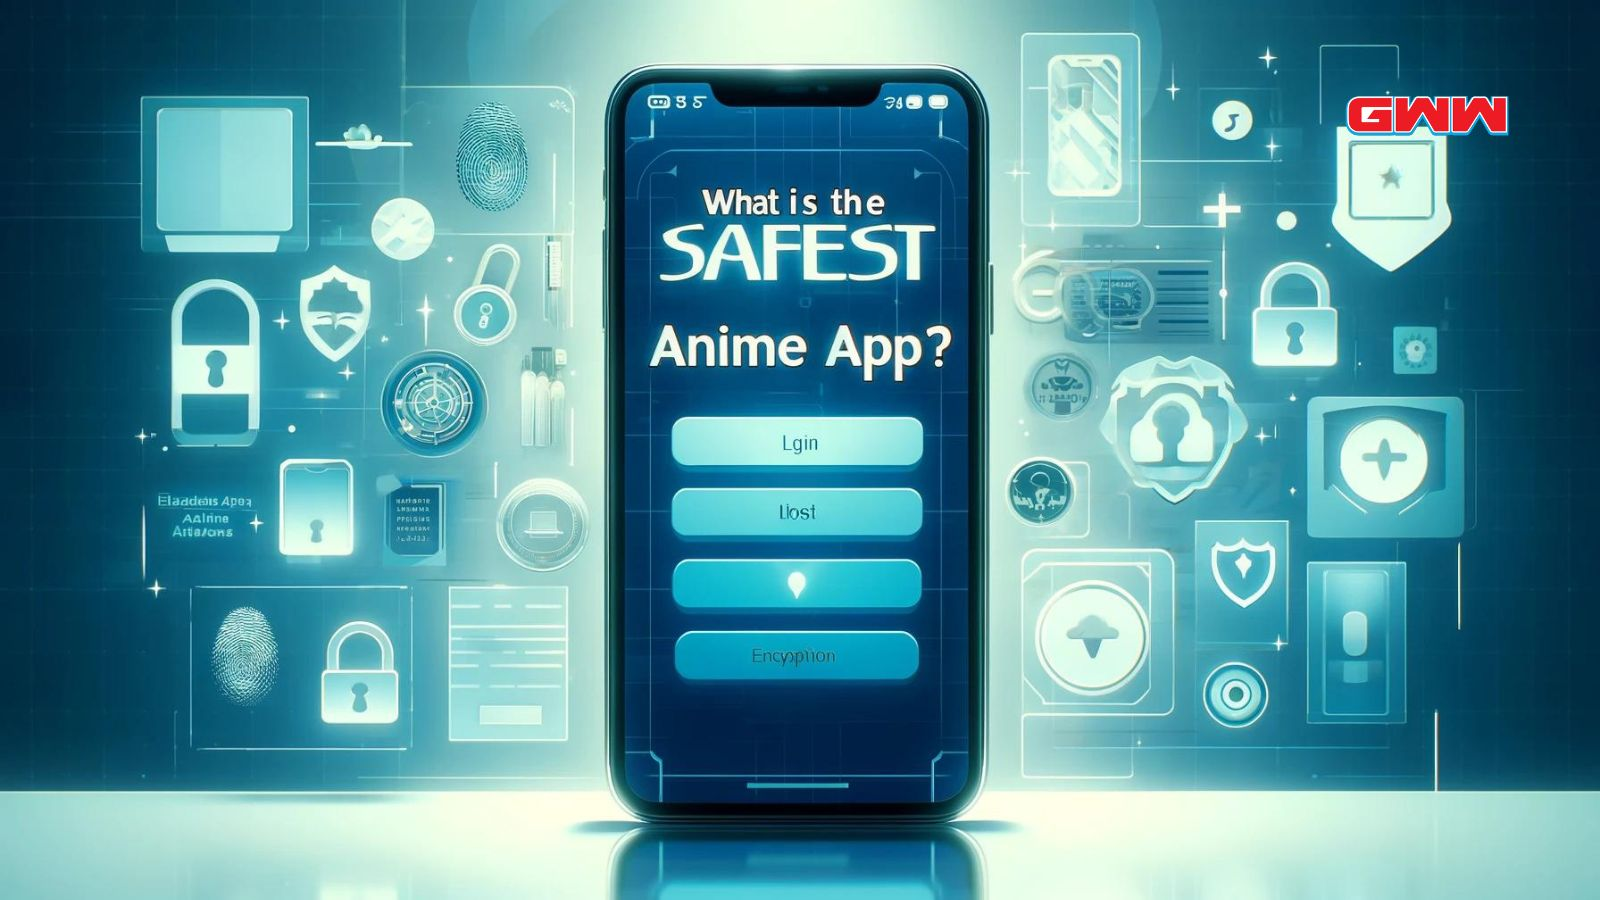 Secure login screen of an anime streaming app